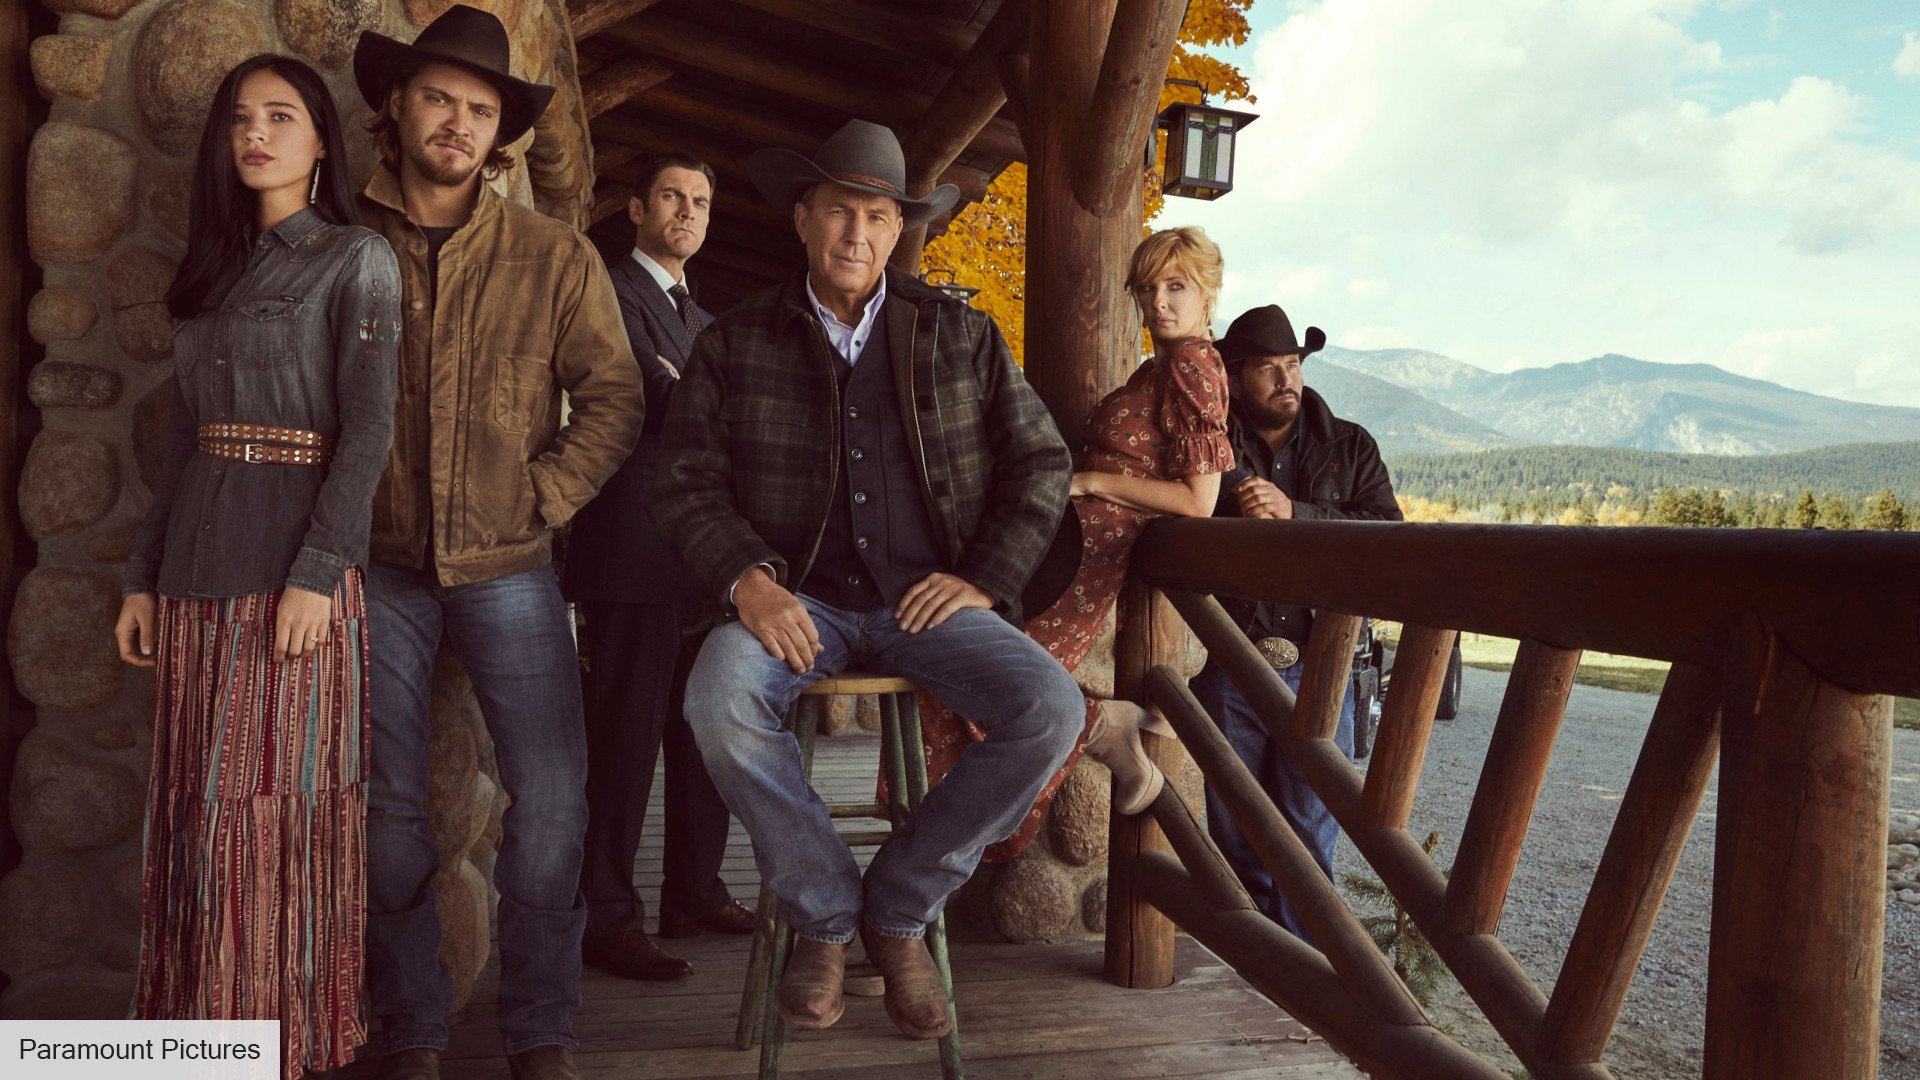 Yellowstone season 5 release date, trailer, cast, and more